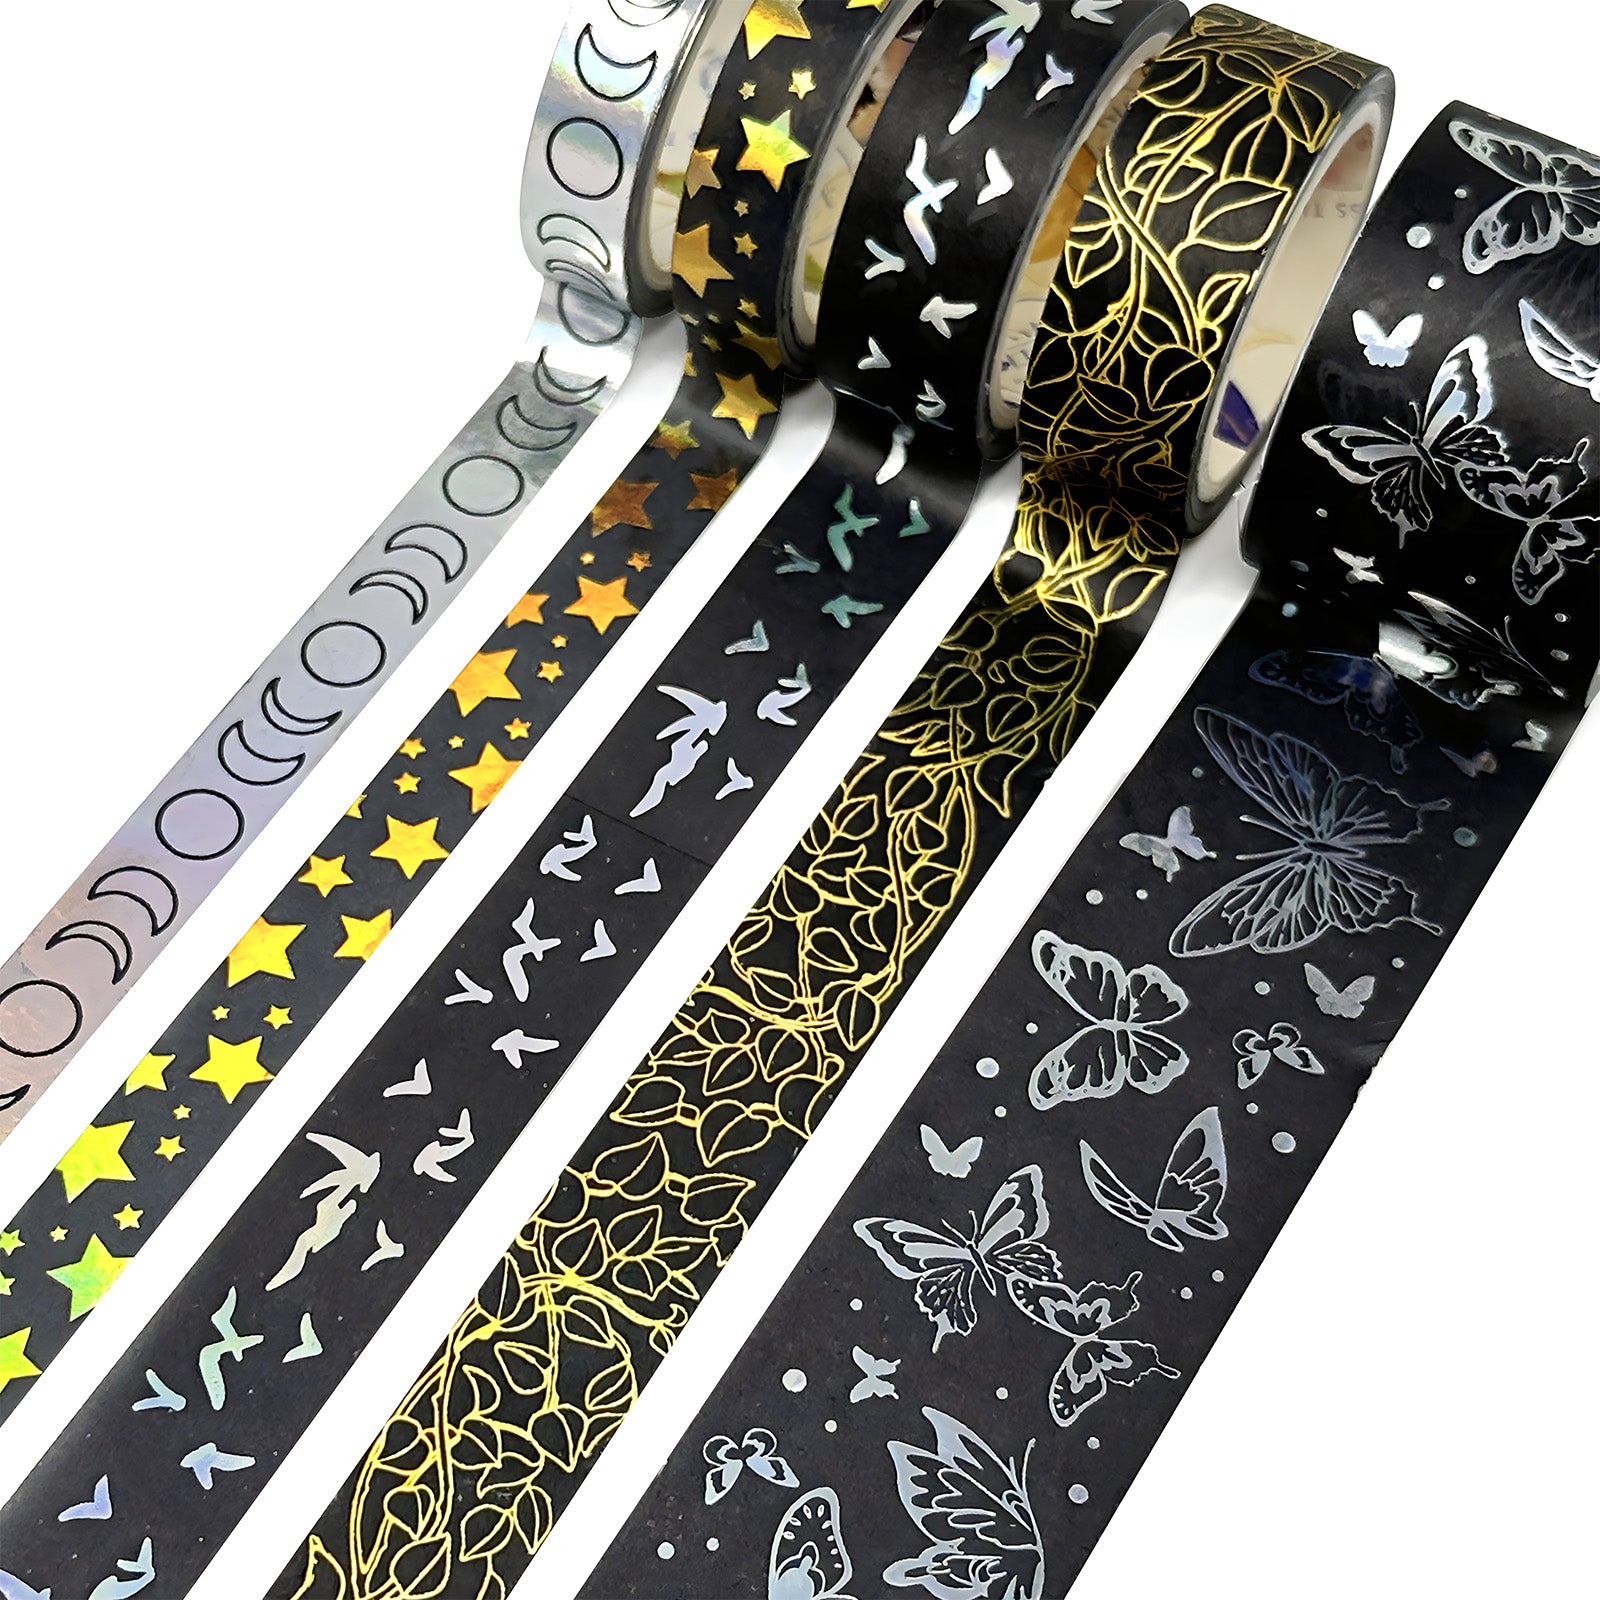 Wrapables Nature Metallic Foil Washi Tape Set for Scrapbooking, Stationery, Diary, Card Making, (8 Rolls), Floral Bloom